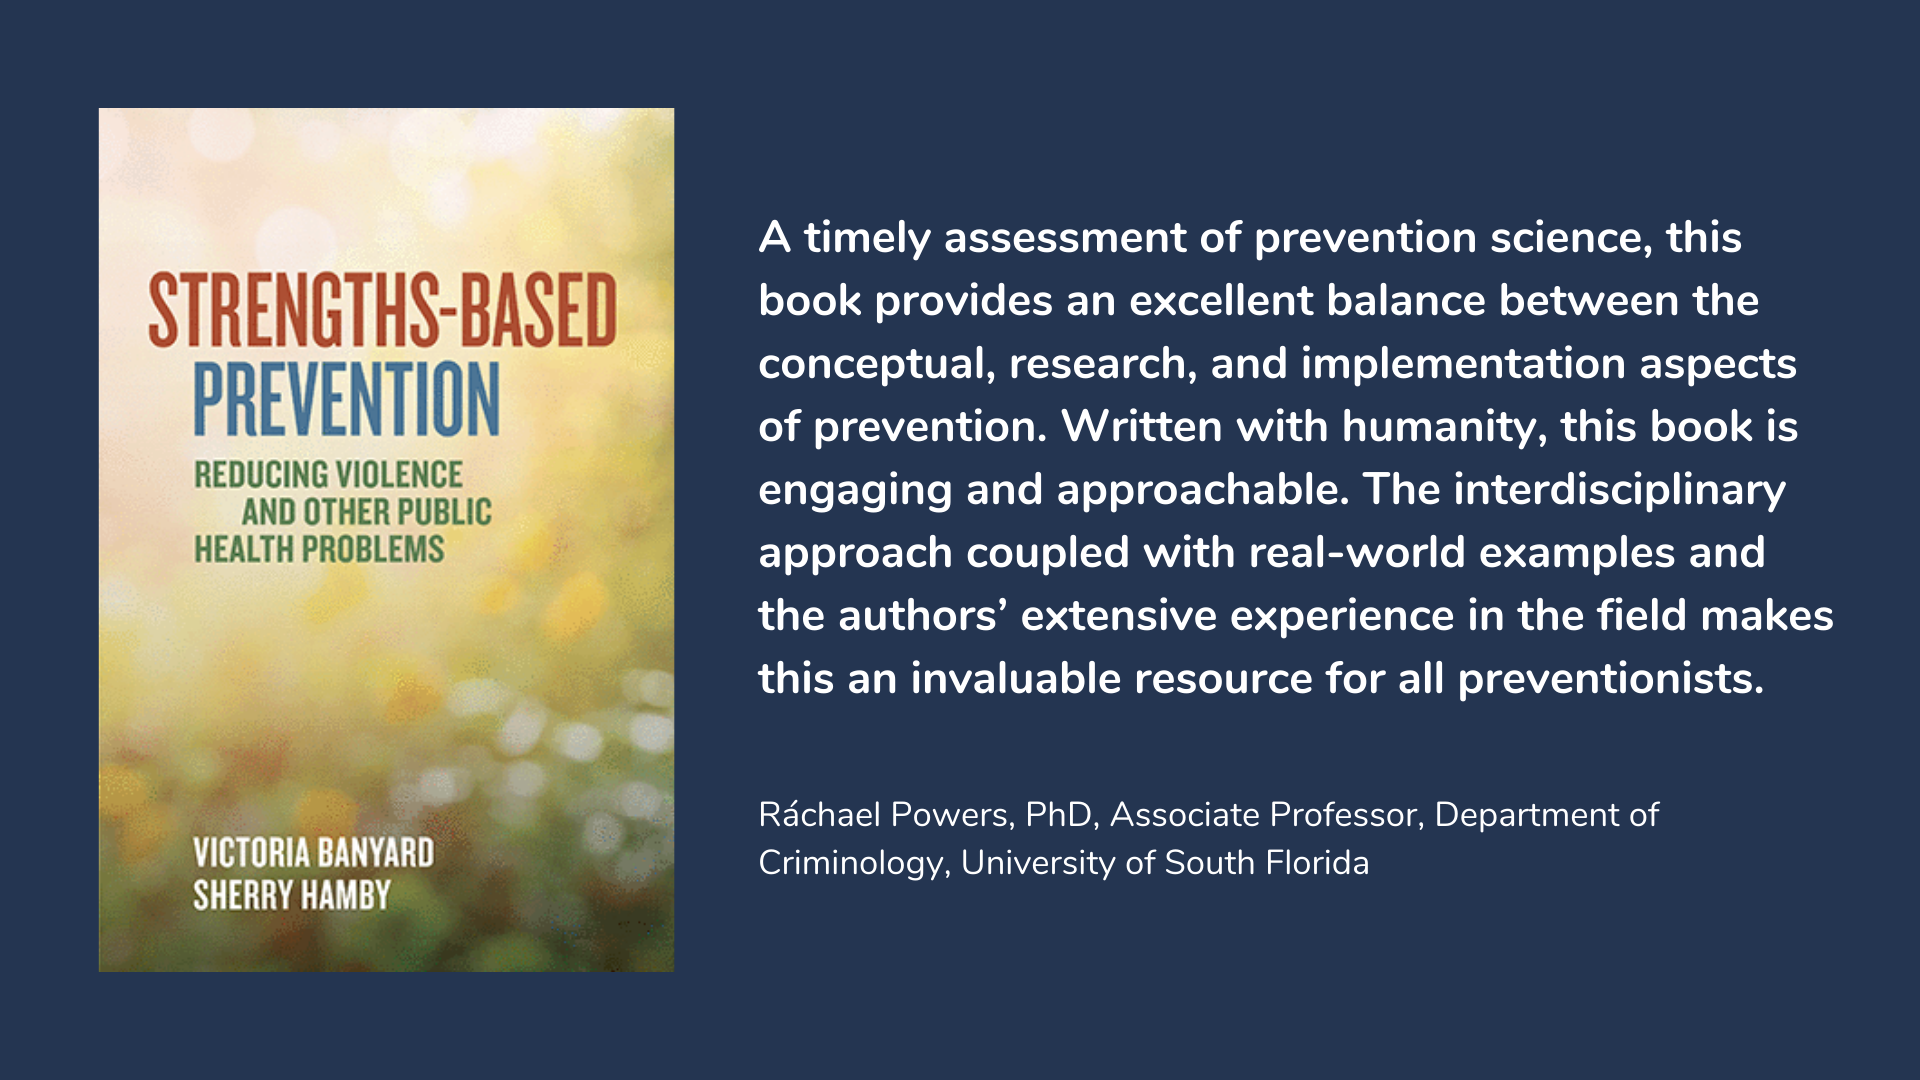 Strengths-Based Prevention: Reducing Violence and Other Public Health Problems book cover and description.